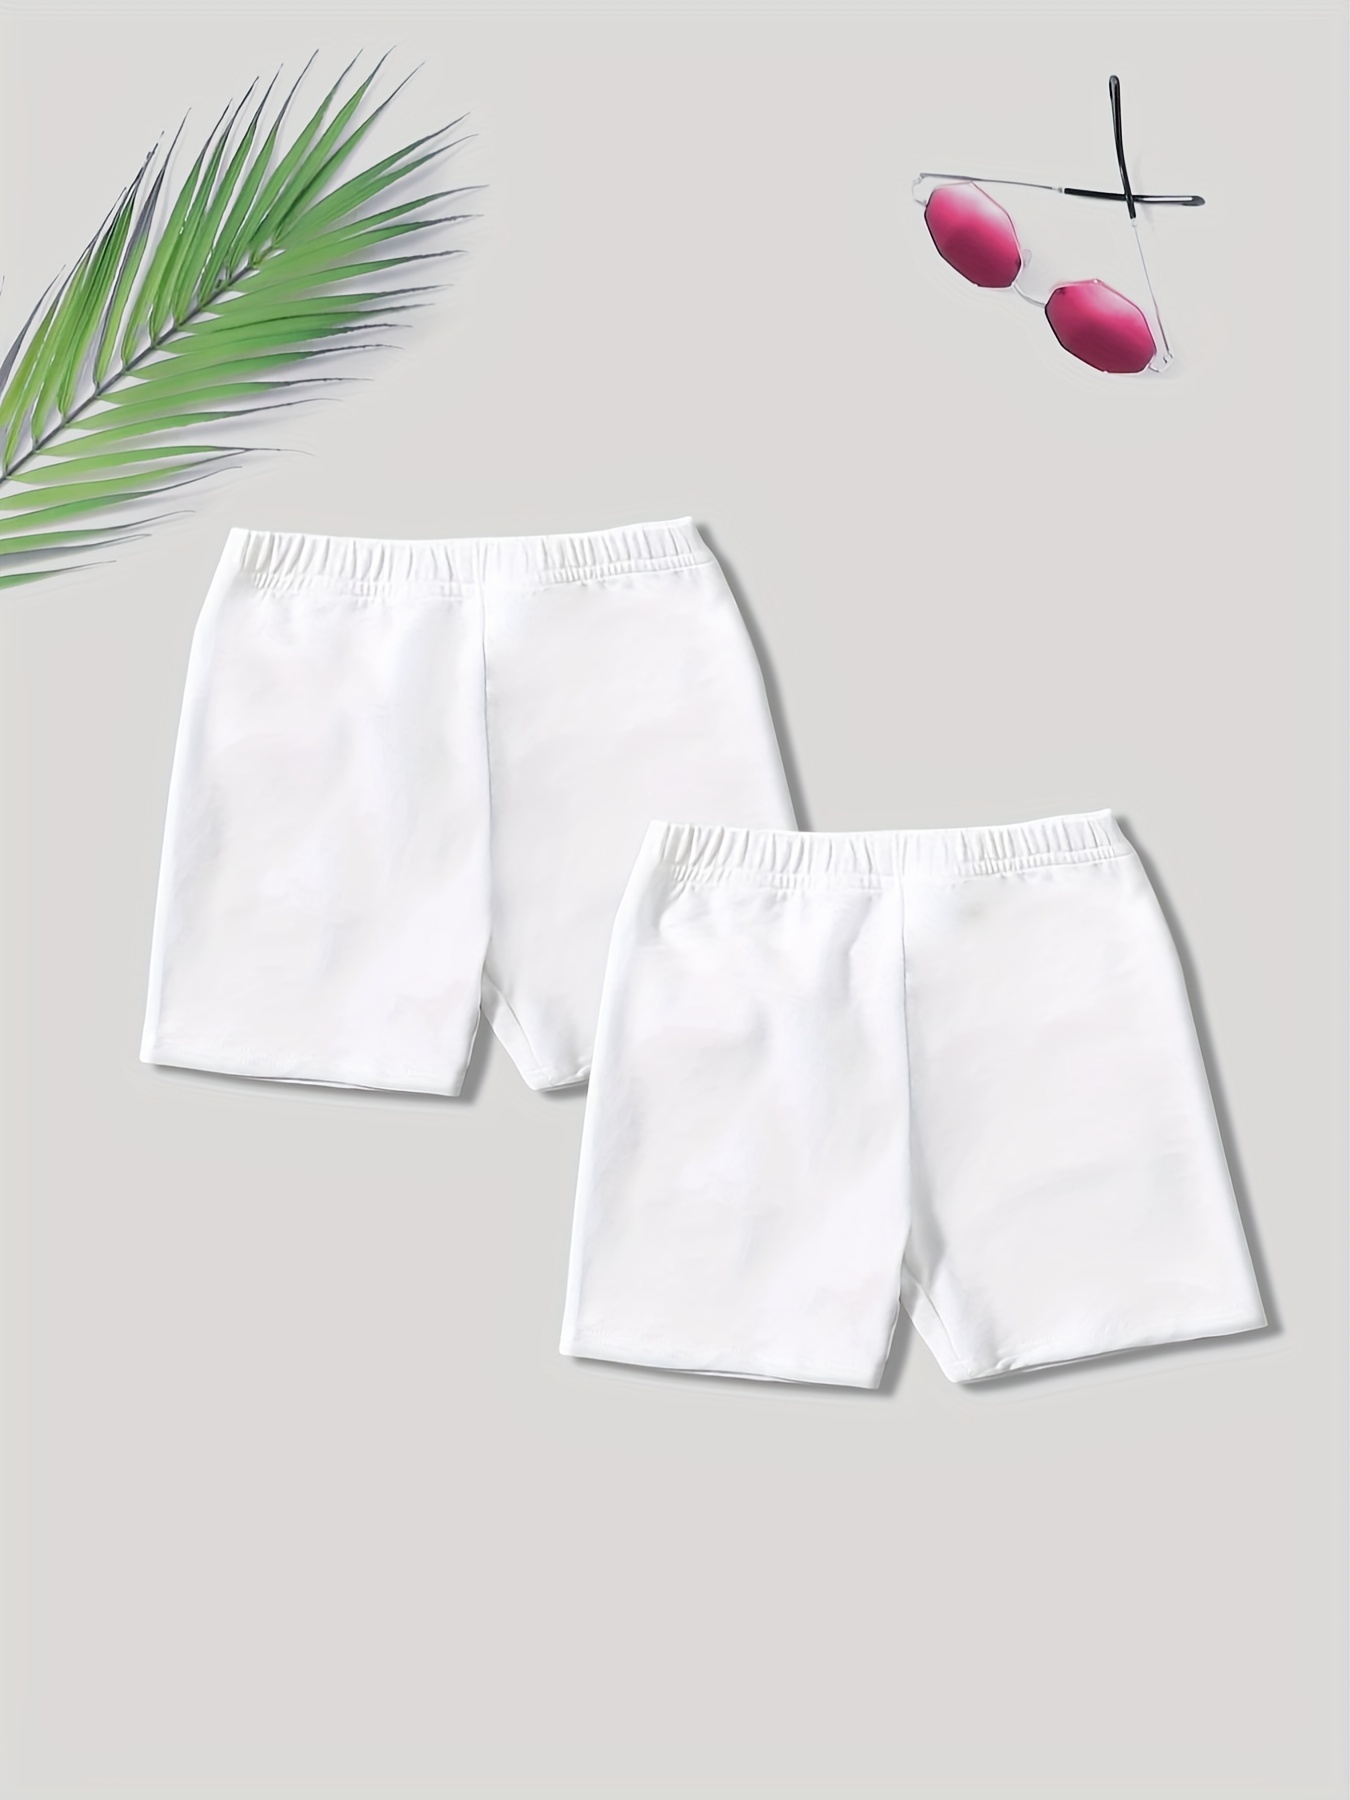 Under Dress Shorts Toddlers